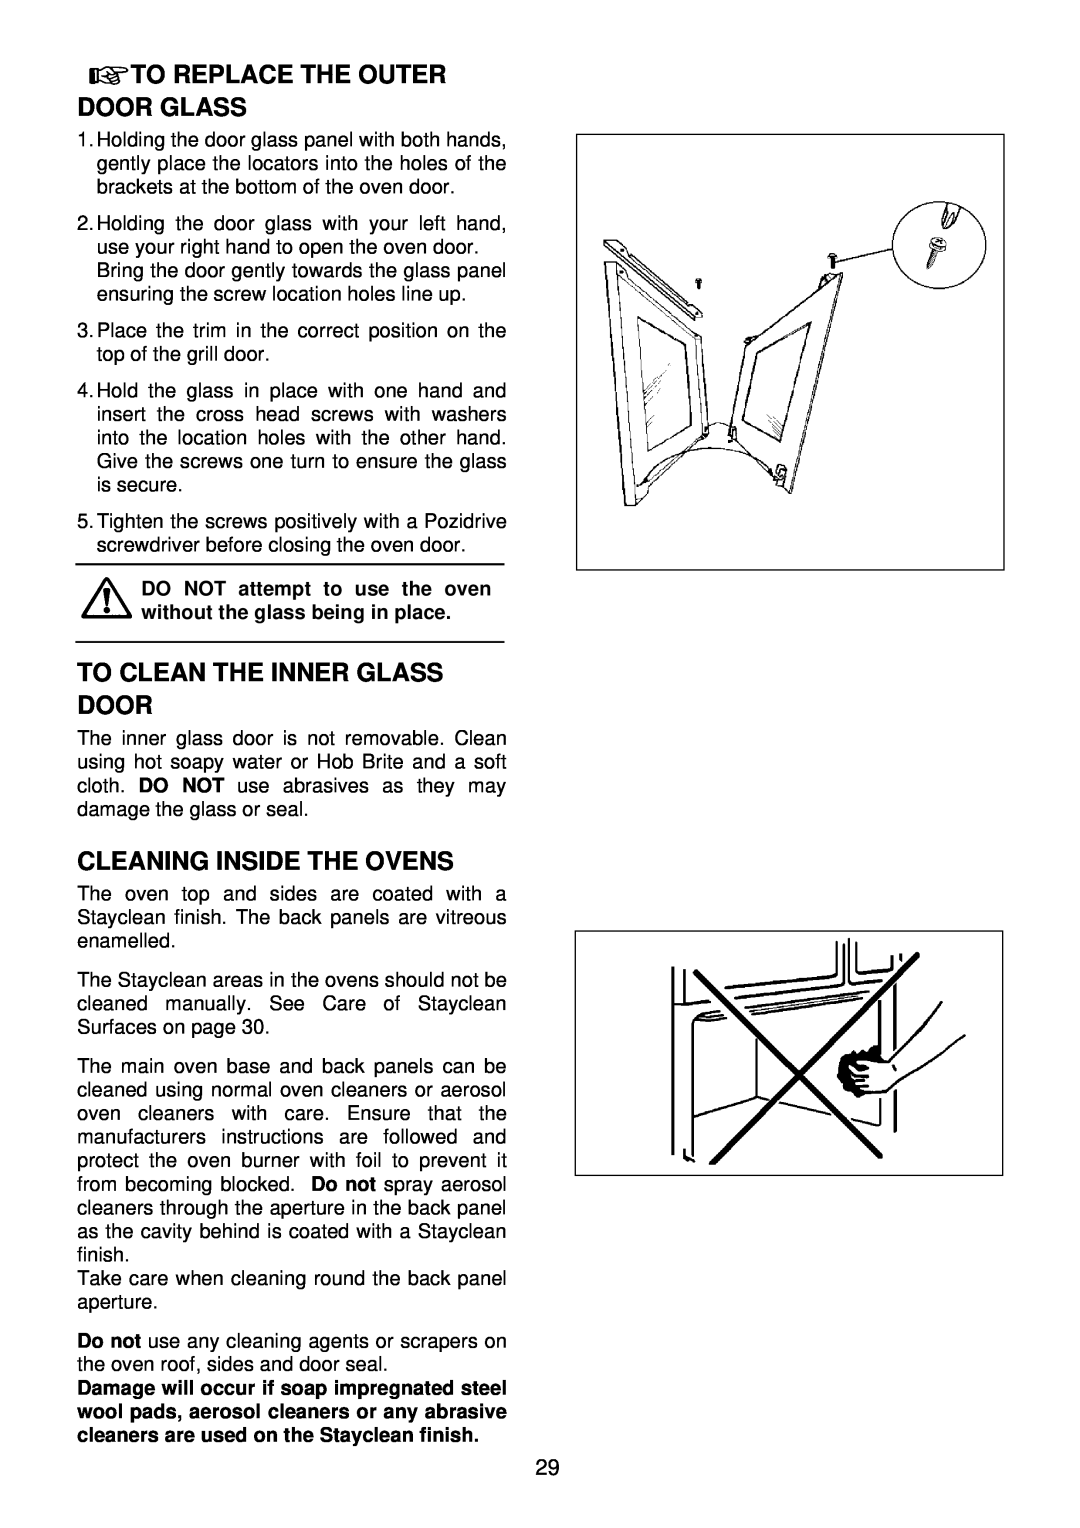 Electrolux EDB 876 manual To Replace The Outer Door Glass, To Clean The Inner Glass Door, Cleaning Inside The Ovens 